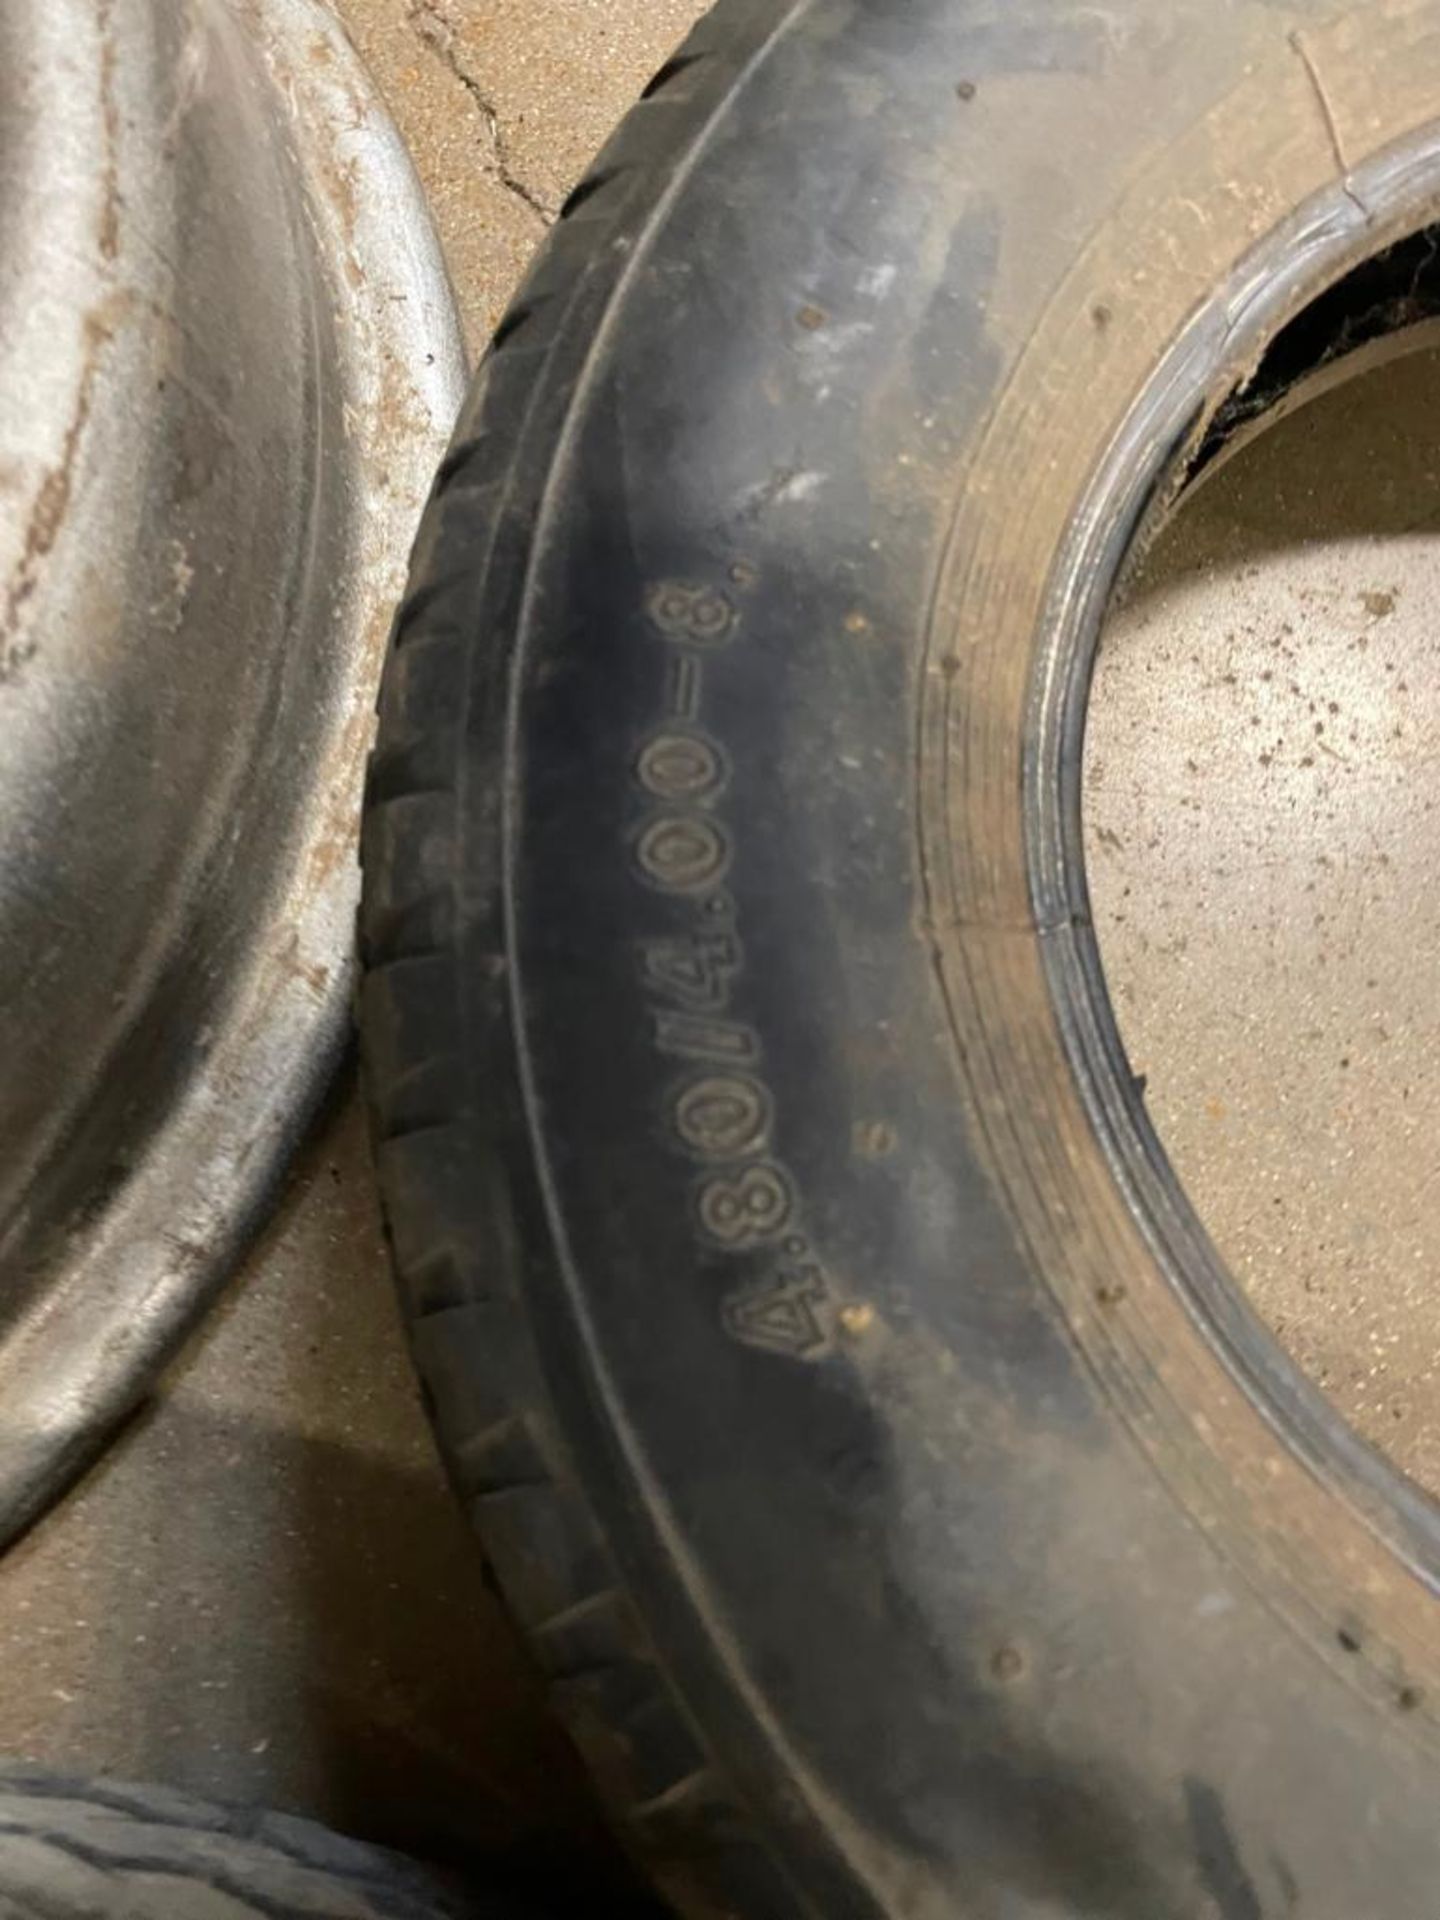 Tire 4.80/4.00-8, 6 Bolt Rim & Tire 5.30-12 with 5 Bolt Rim. Located in Hazelwood, MO - Image 6 of 9